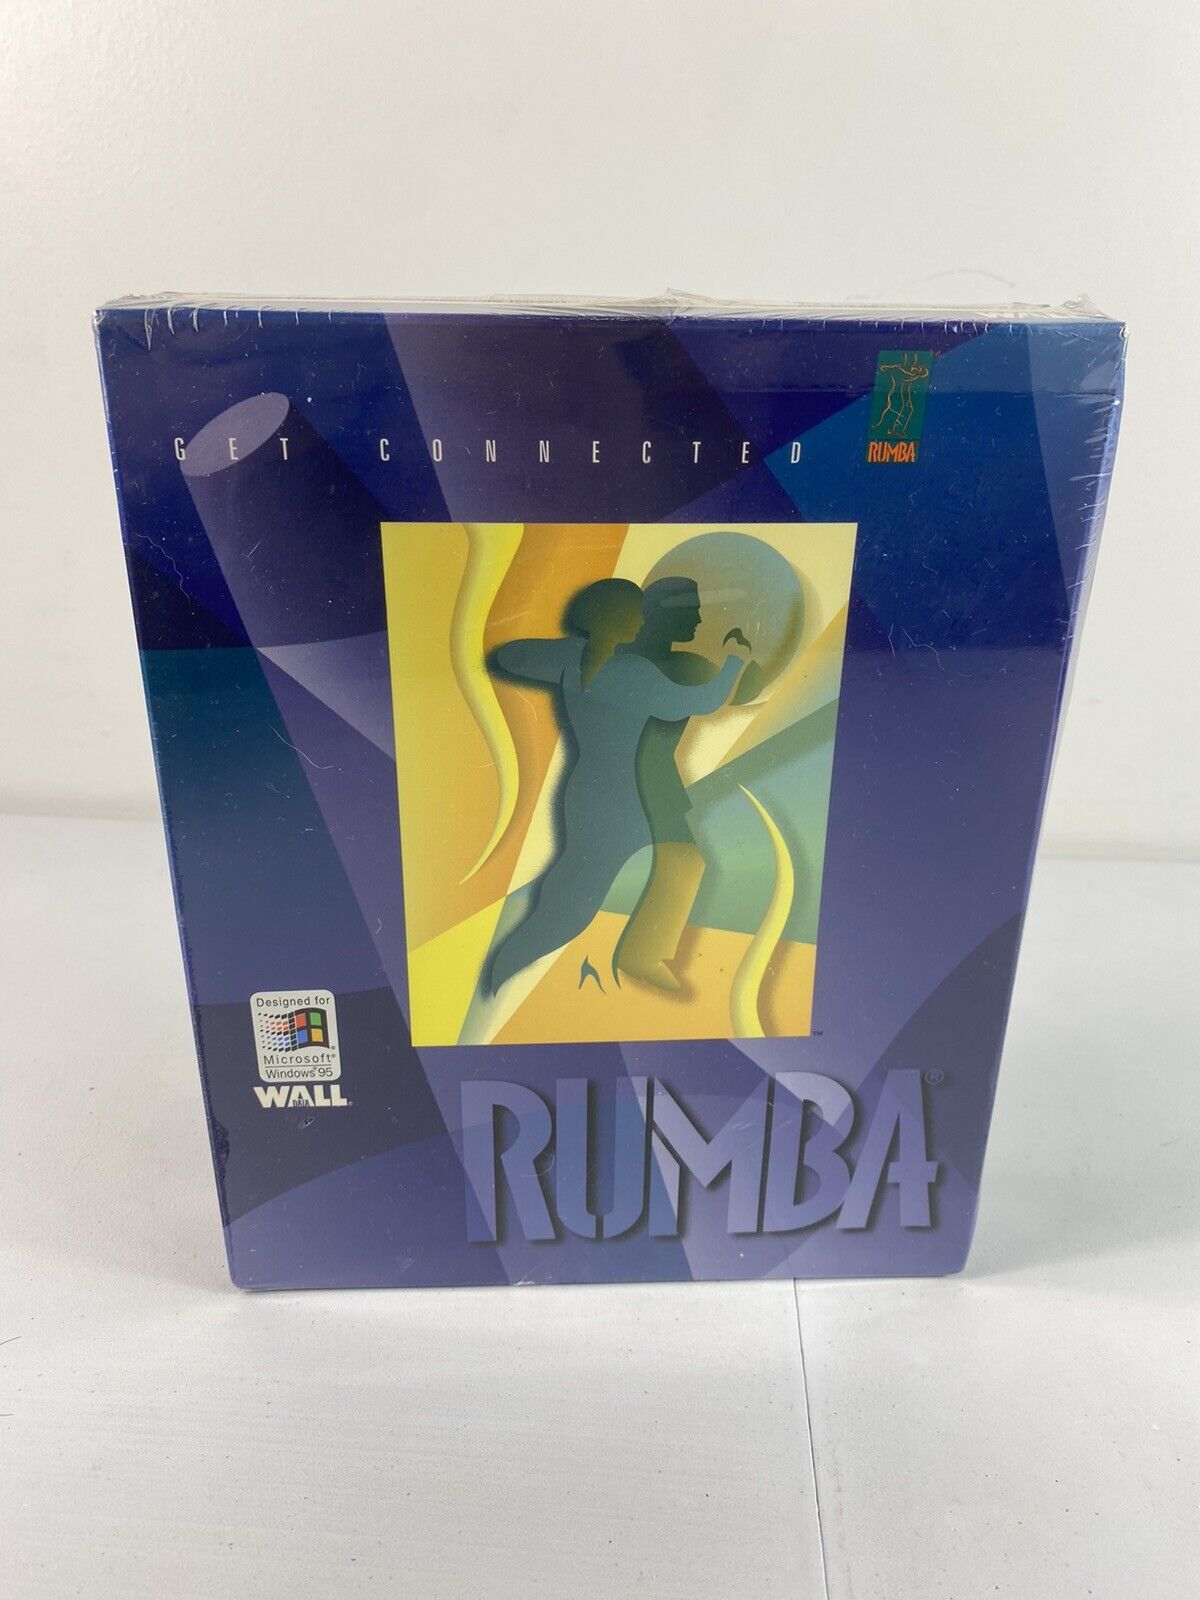 New Wall Data Rumba Office for Windows 95/NT CD-ROM Vintage 1995